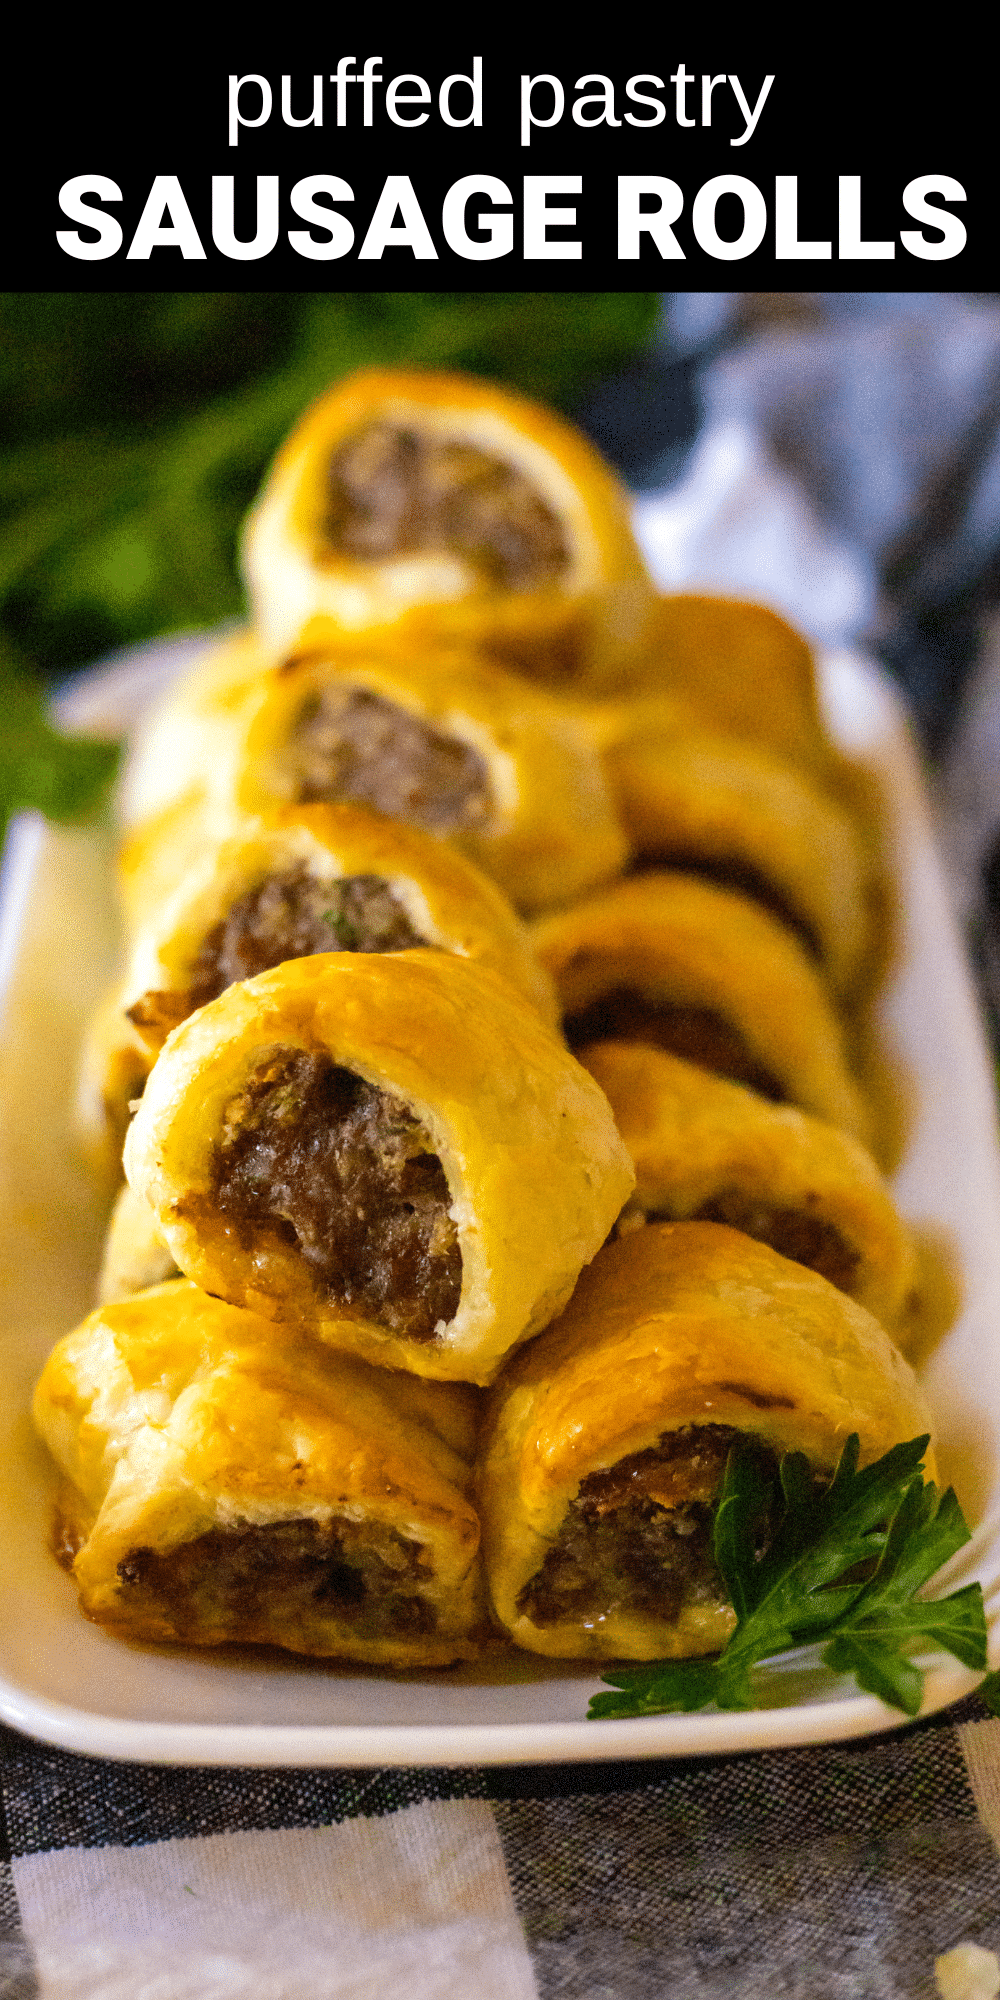 These delicious Sausage Rolls with Puffed Pastry are delightfully flaky, savory, and absolutely irresistible. They make the ultimate, tasty appetizer or hearty snack, using just a few simple ingredients.